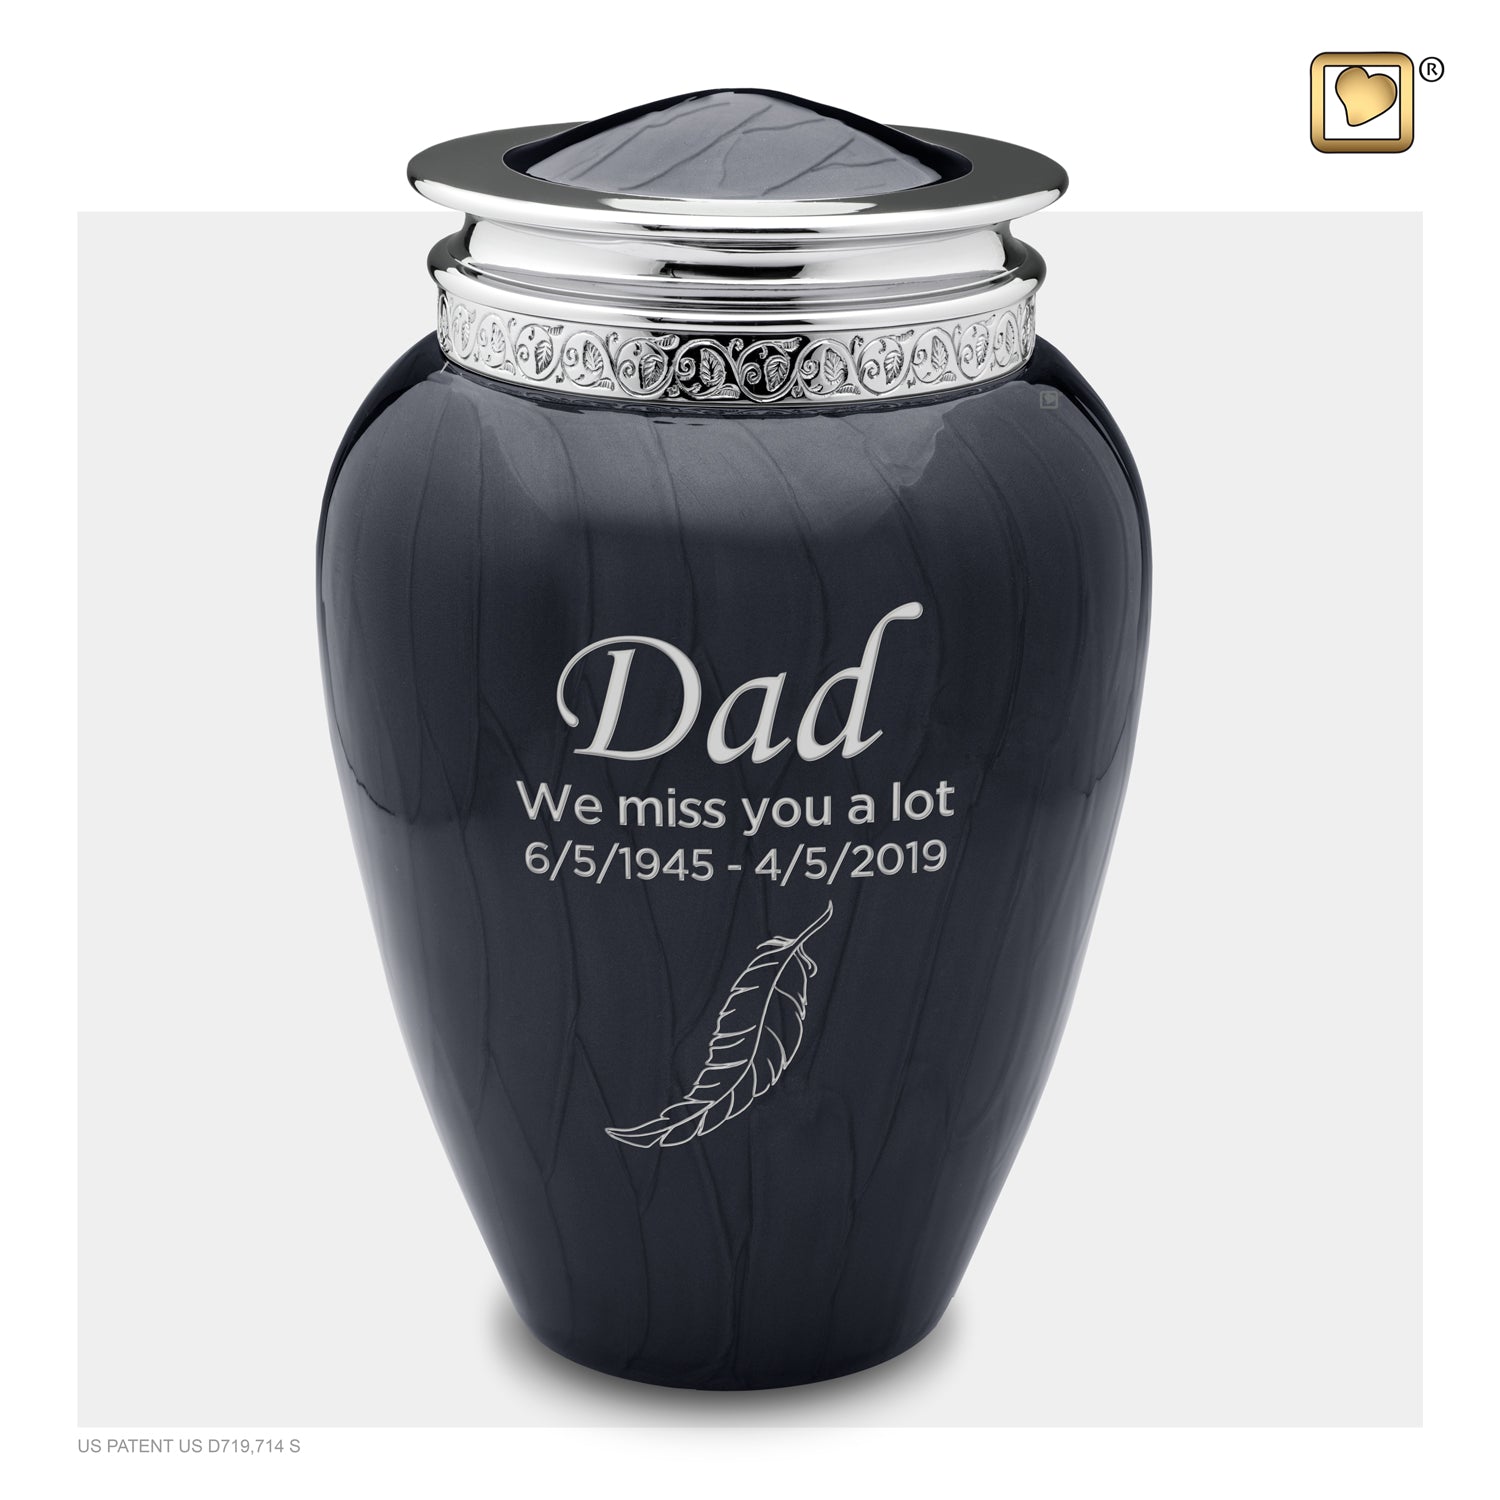 Adult Blessing Midnight Black Colored Silver Cremation Urn